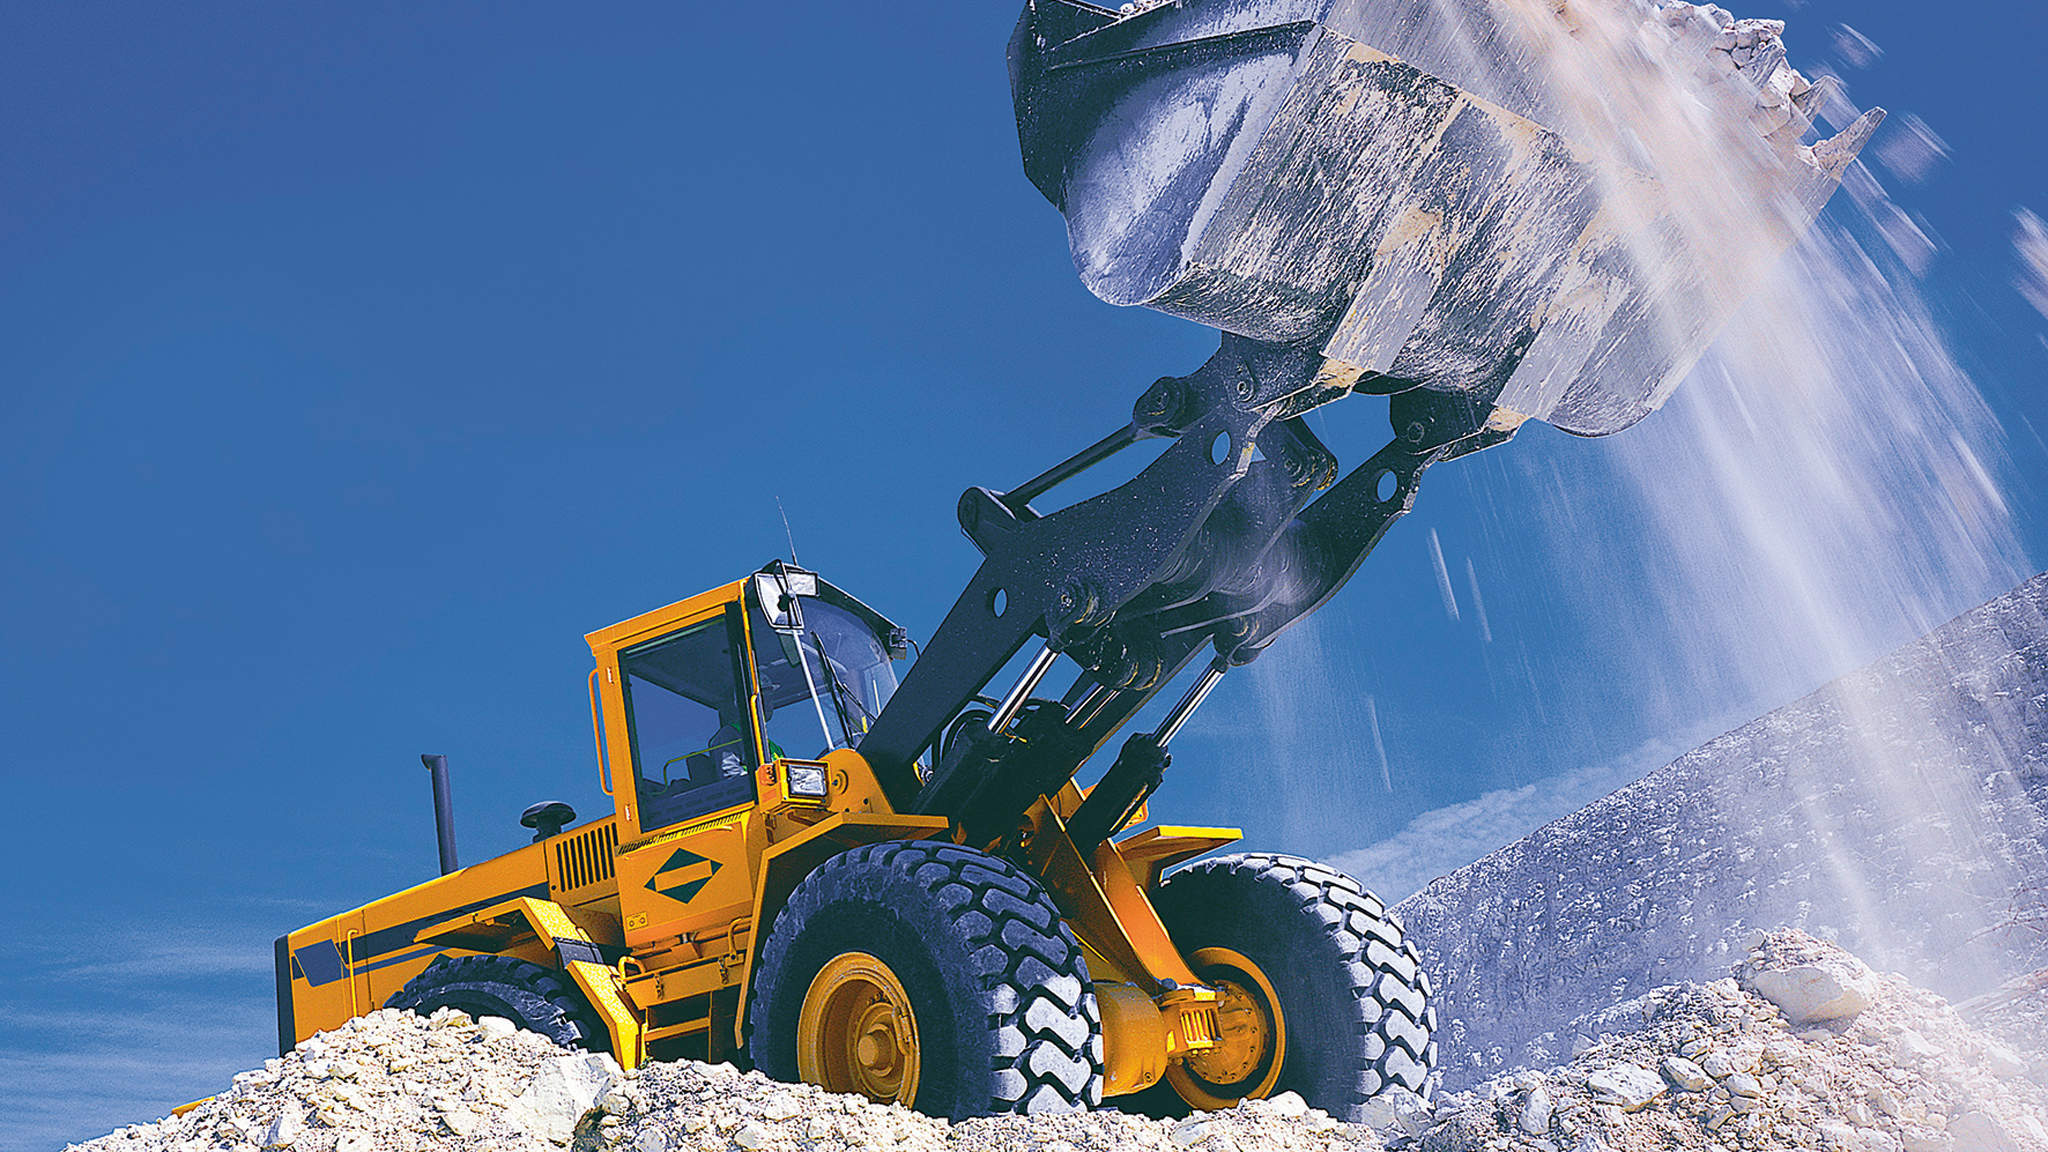 Camso supplies tires for massive jobs.